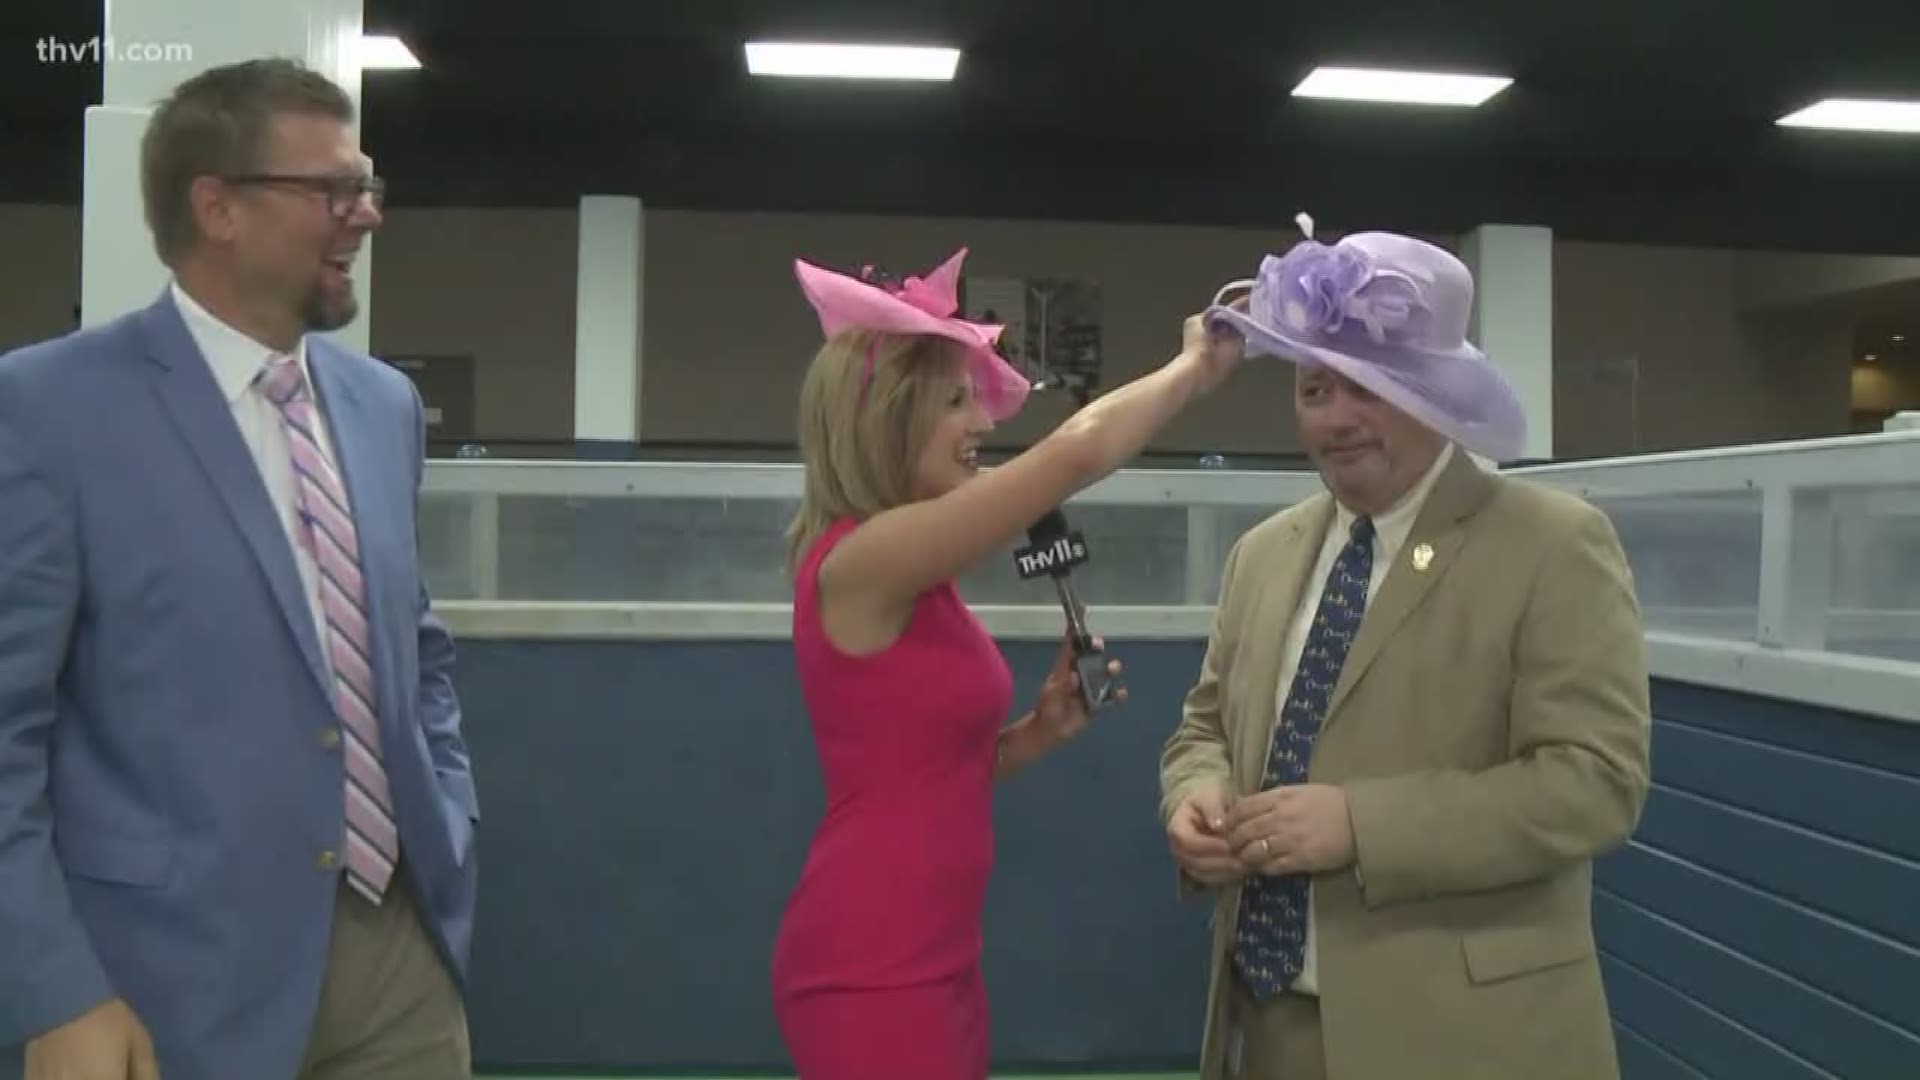 David Longinotti joins Laura and Adam in colorful derby hats.